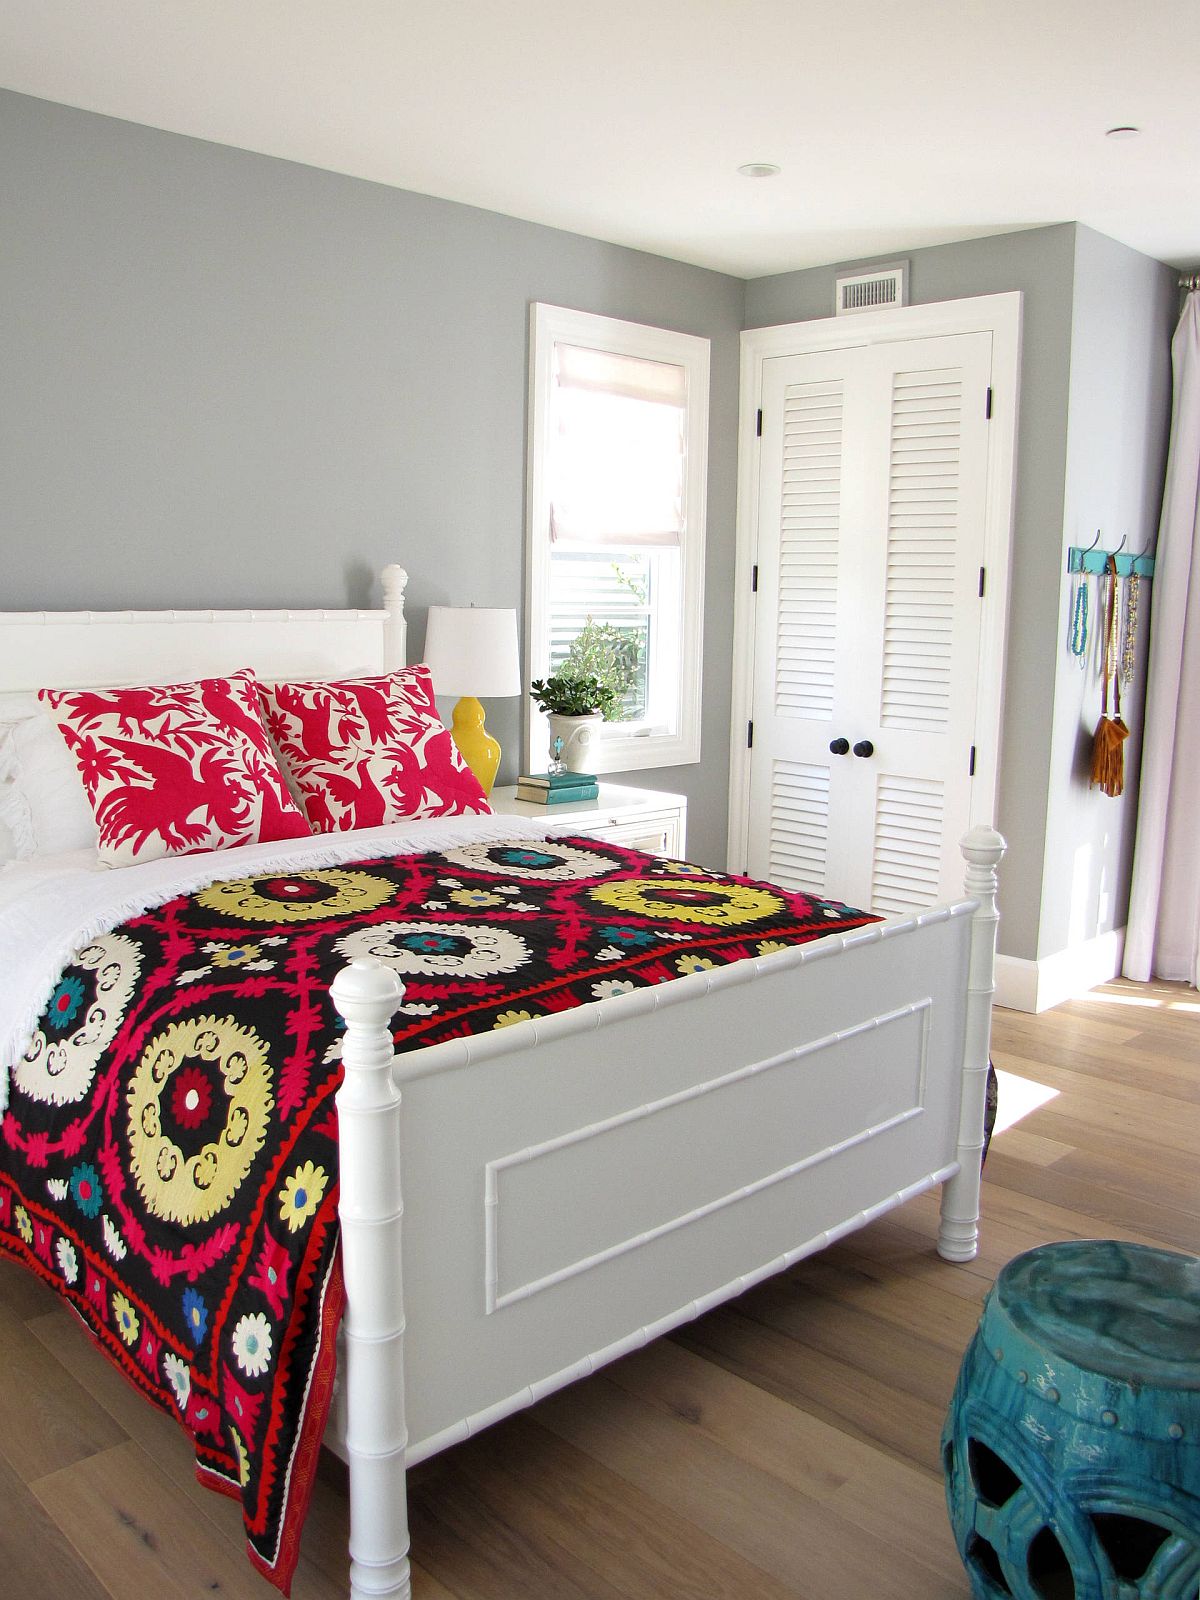 Use-textiles-to-add-bright-color-to-the-bedroom-with-ease-53191